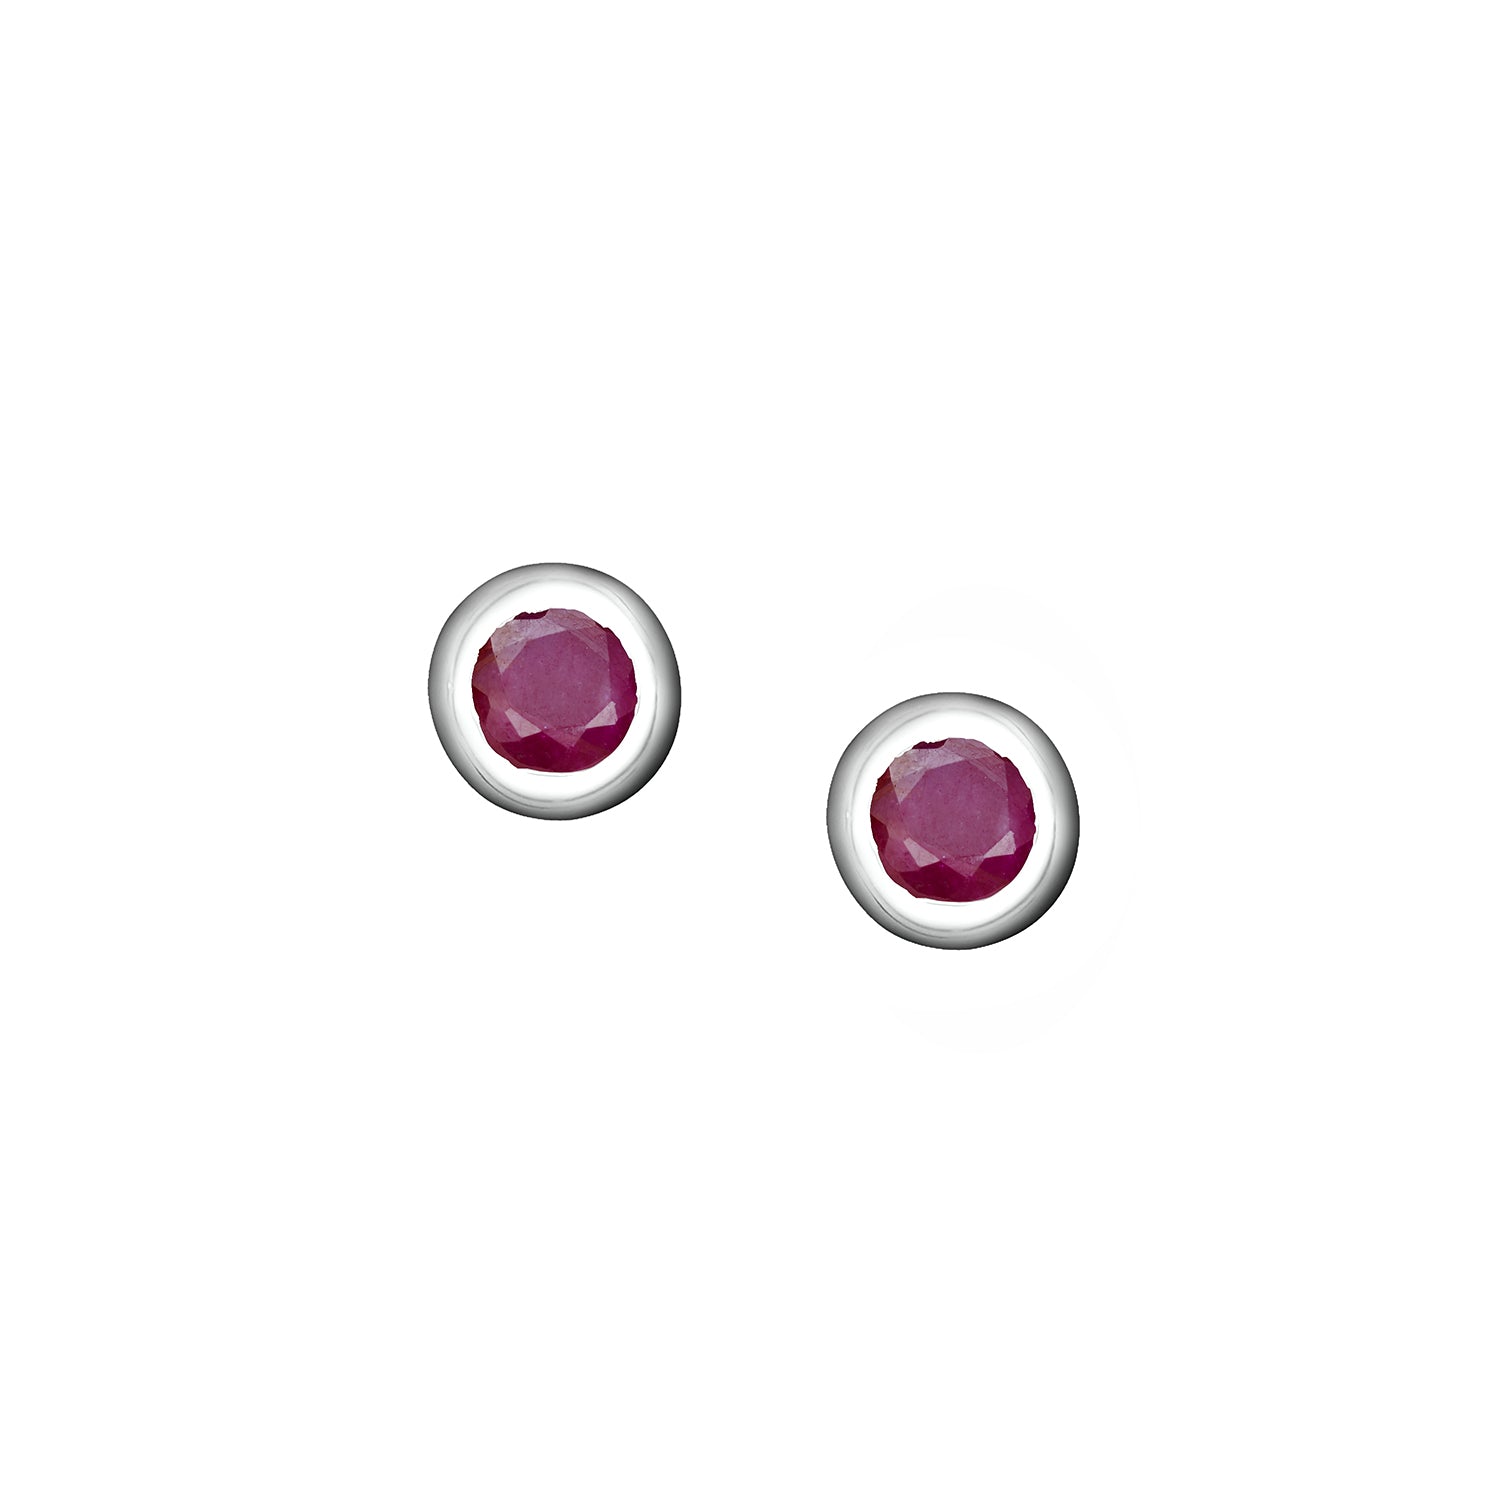 Polished Silver Crescent Moon Birthstone Earrings - July / Indian Ruby